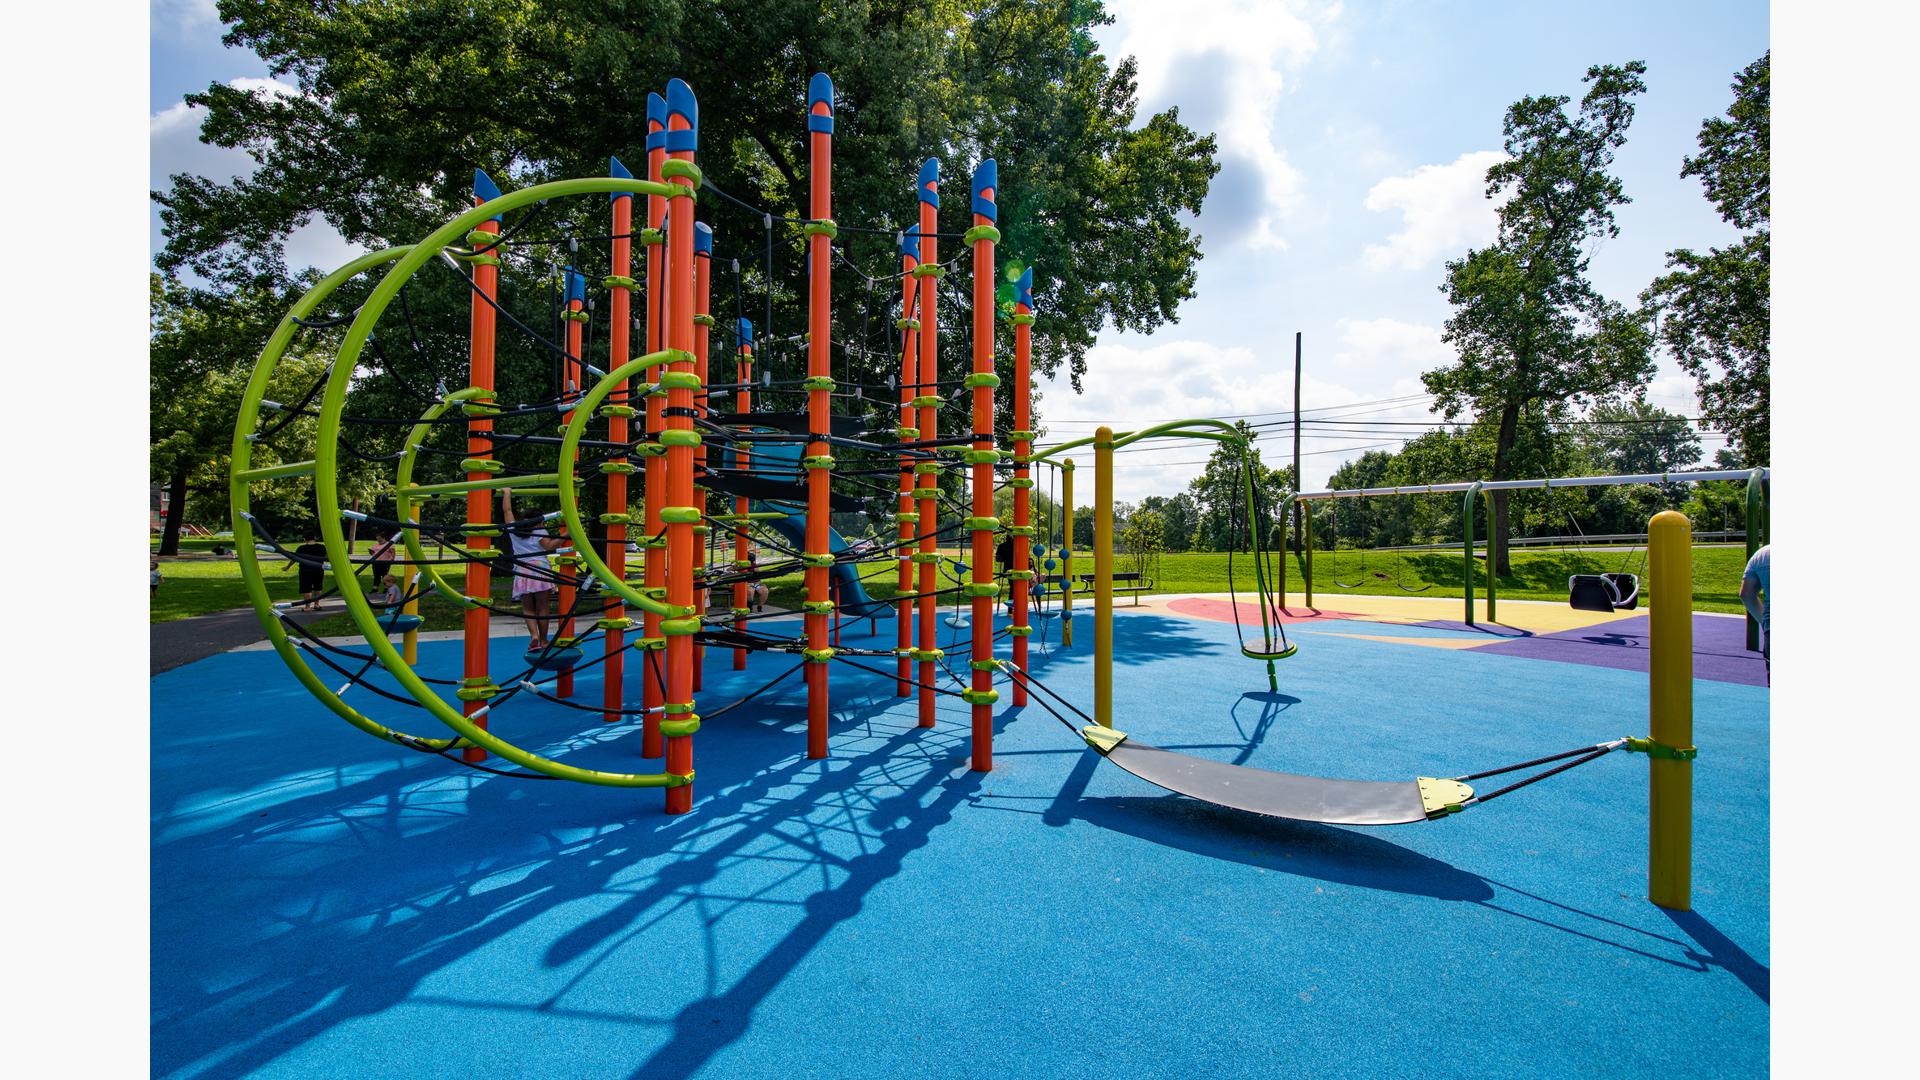 38th Avenue Neighborhood Park - Playground Design for All Ages!